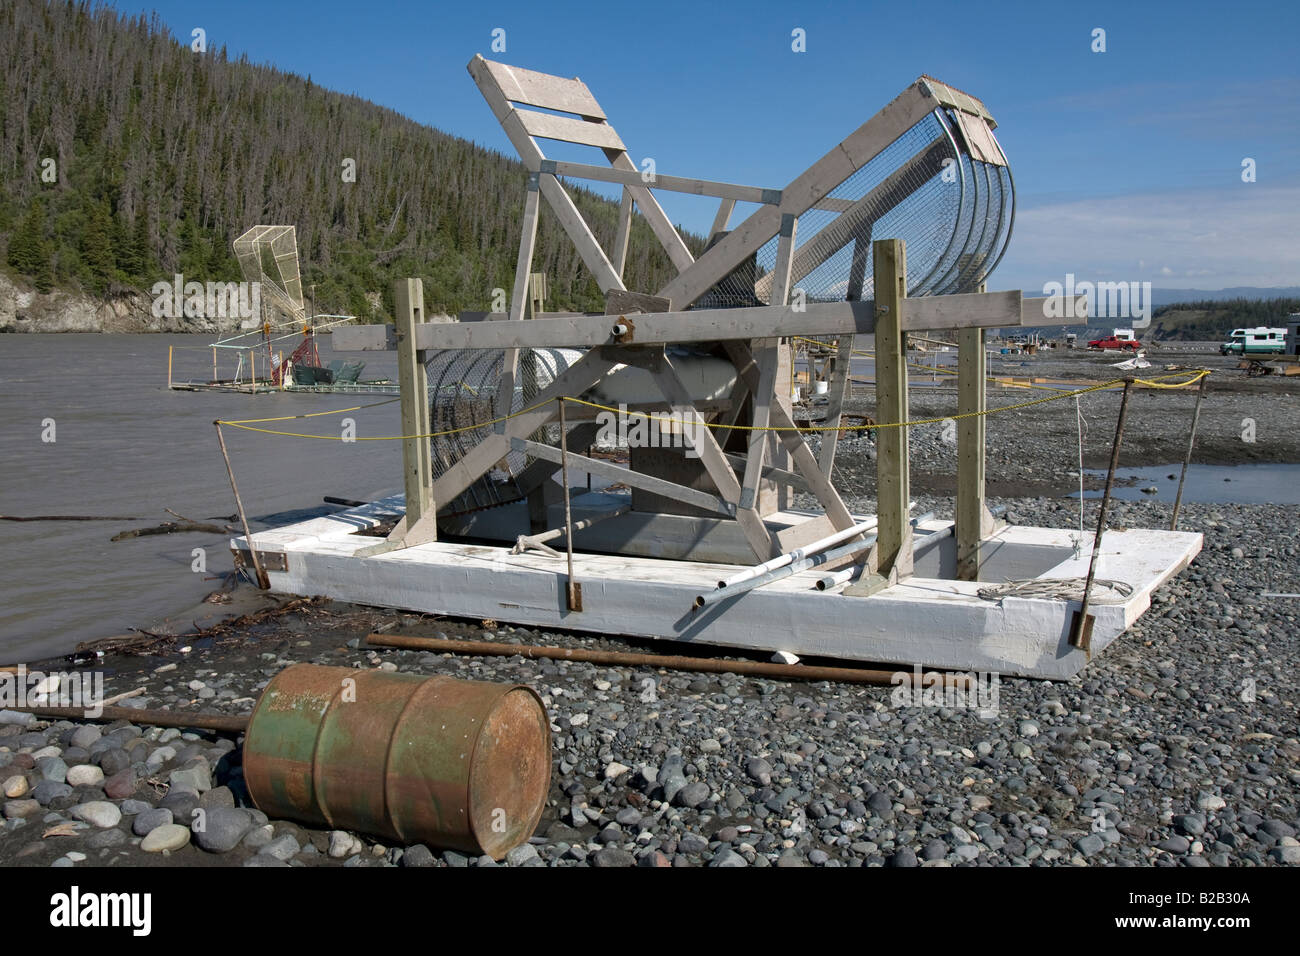 Fishing wheel ashore, for automated catching of salmon in Copper